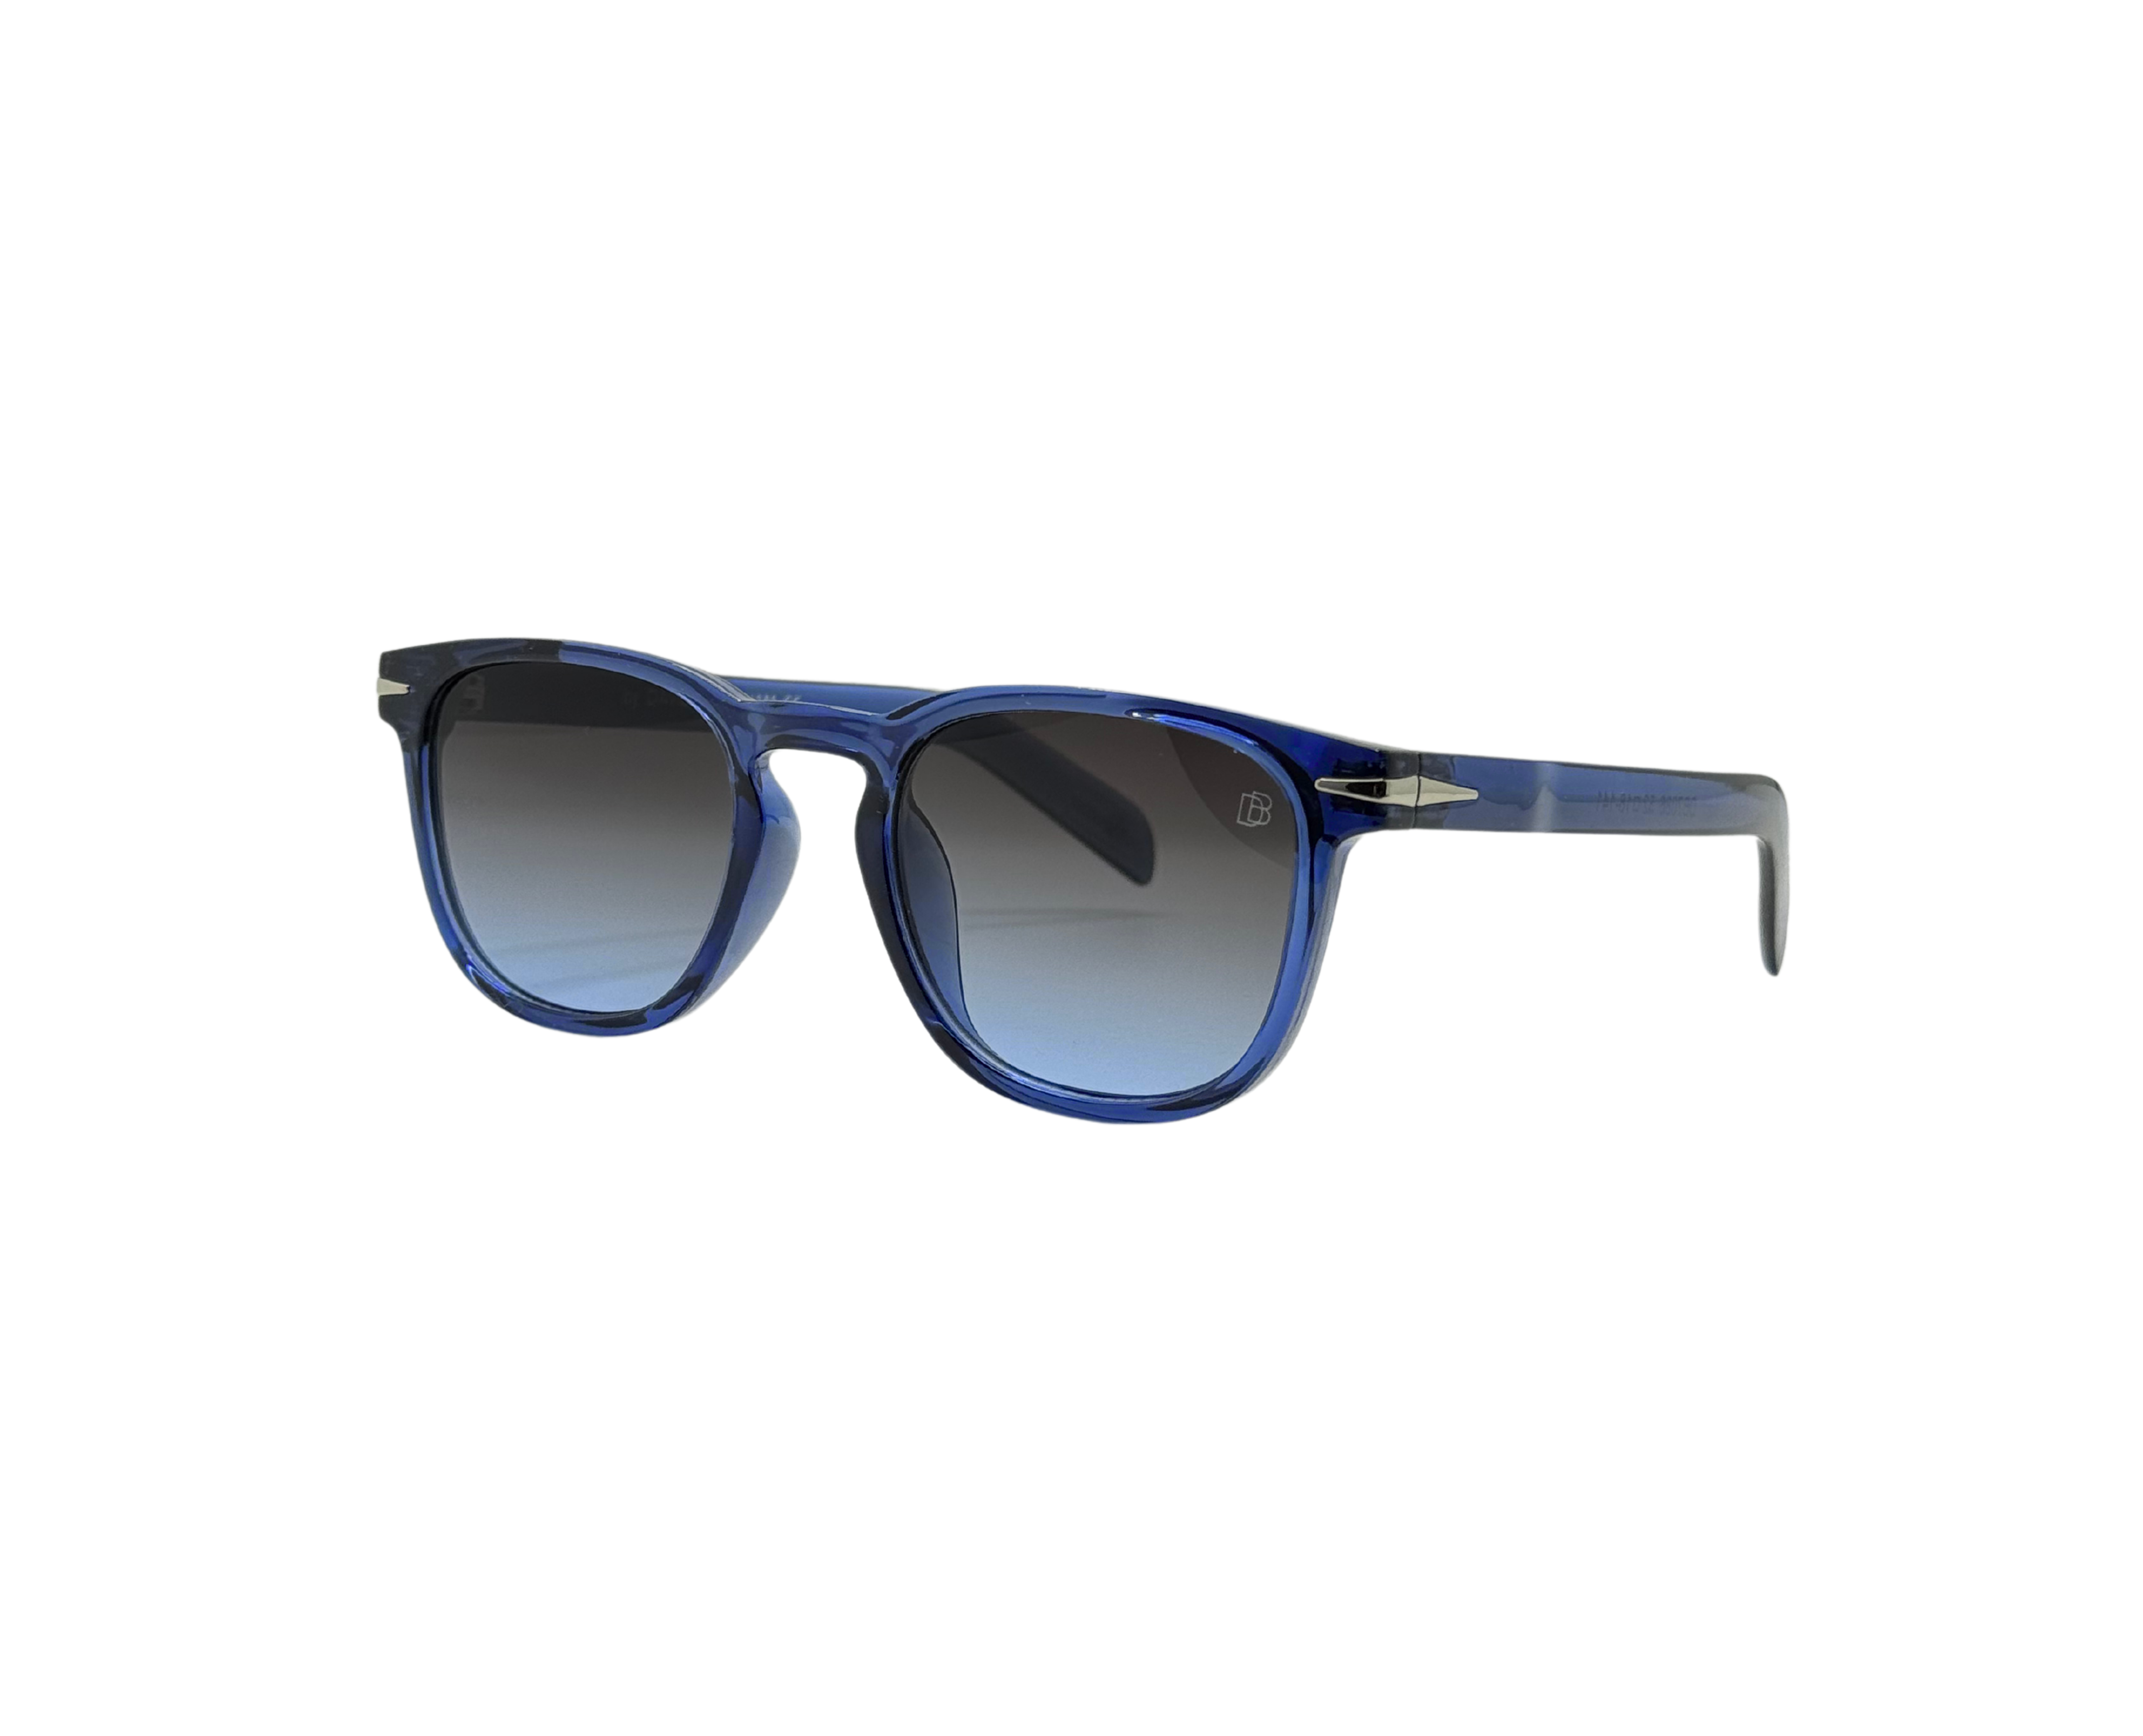 NS Deluxe - 7086 - Blue - Sunglasses